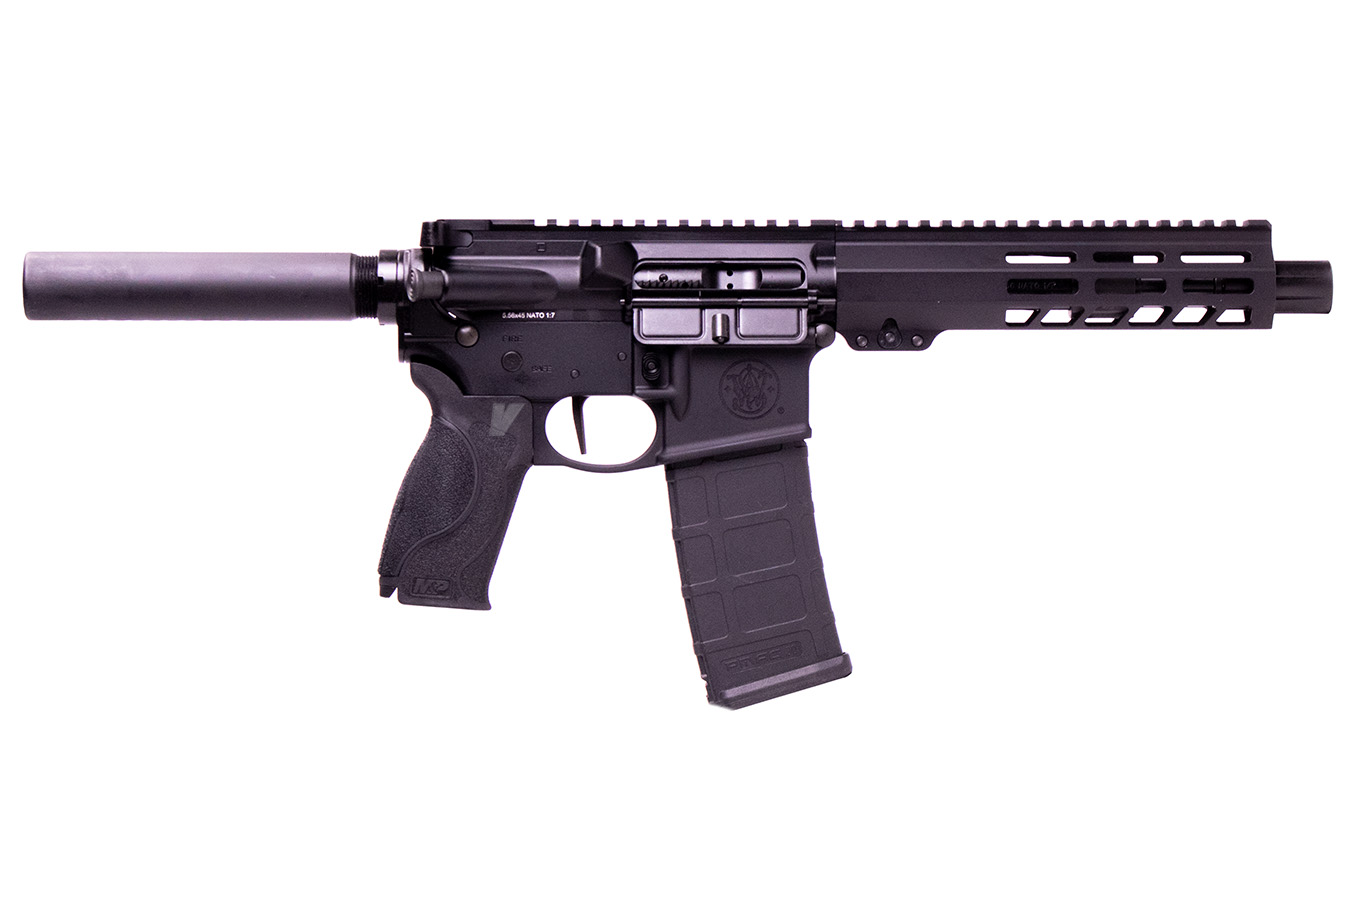 MP15 5.56MM AR PISTOL WITH FLAT TRIGGER